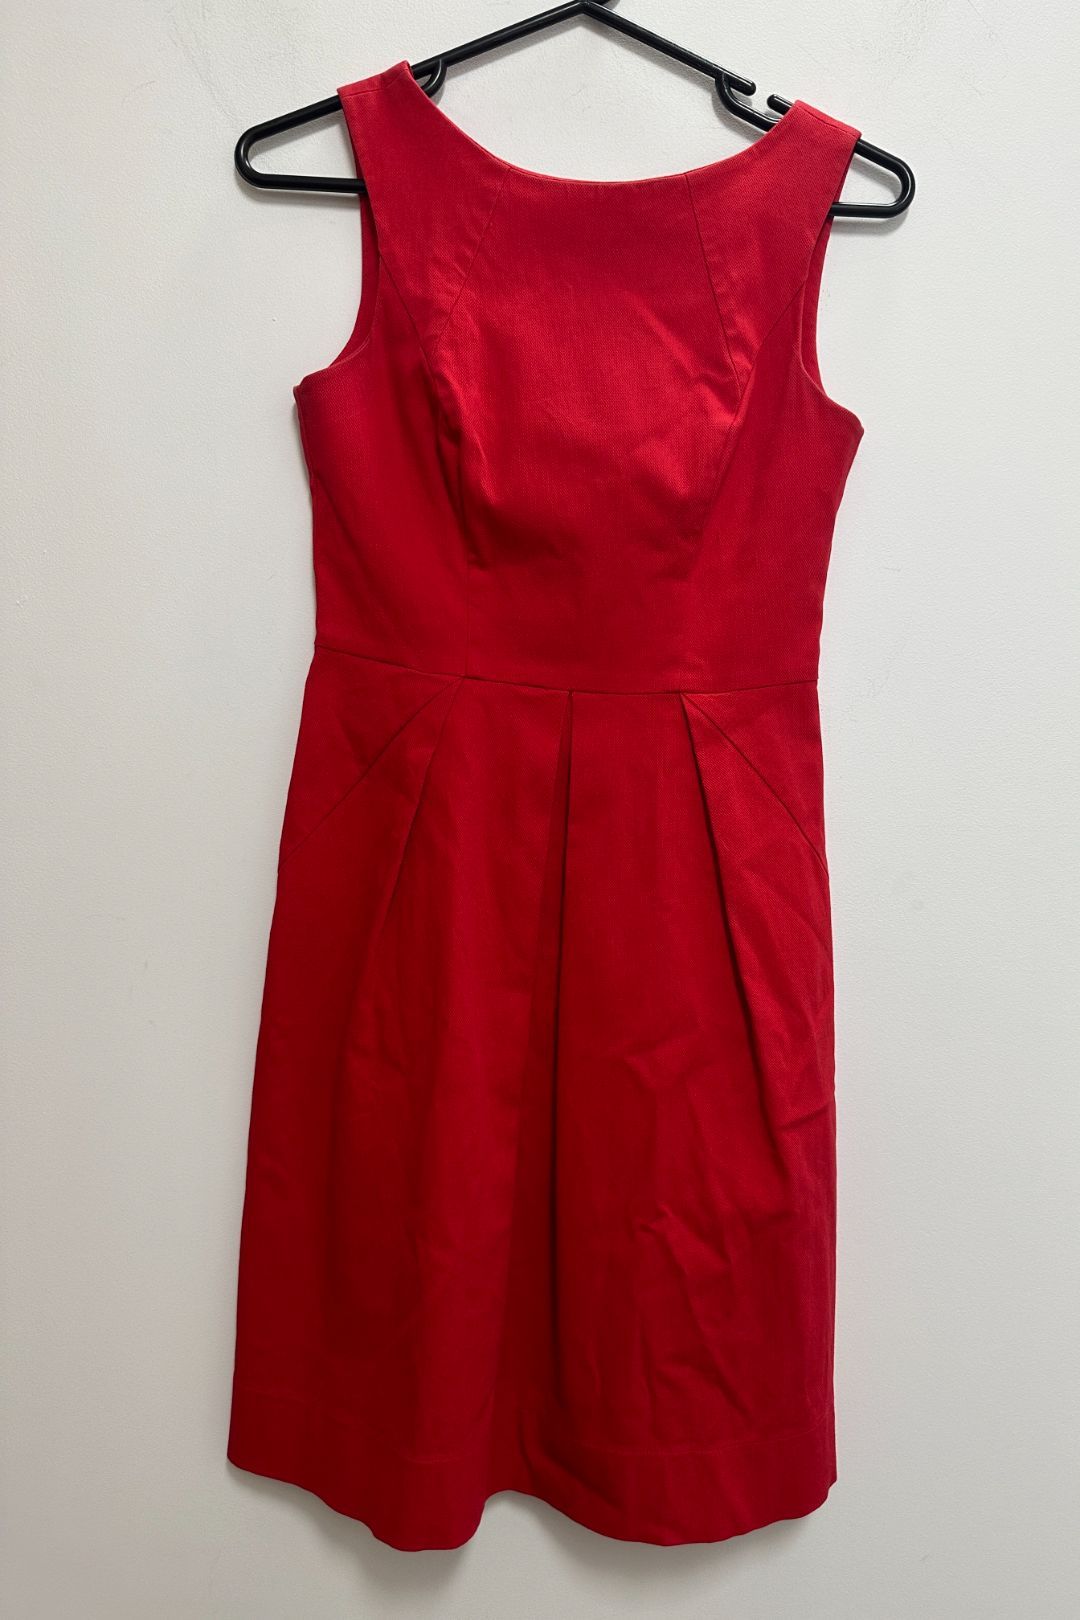 Cue Chic A-Line Dress in Red